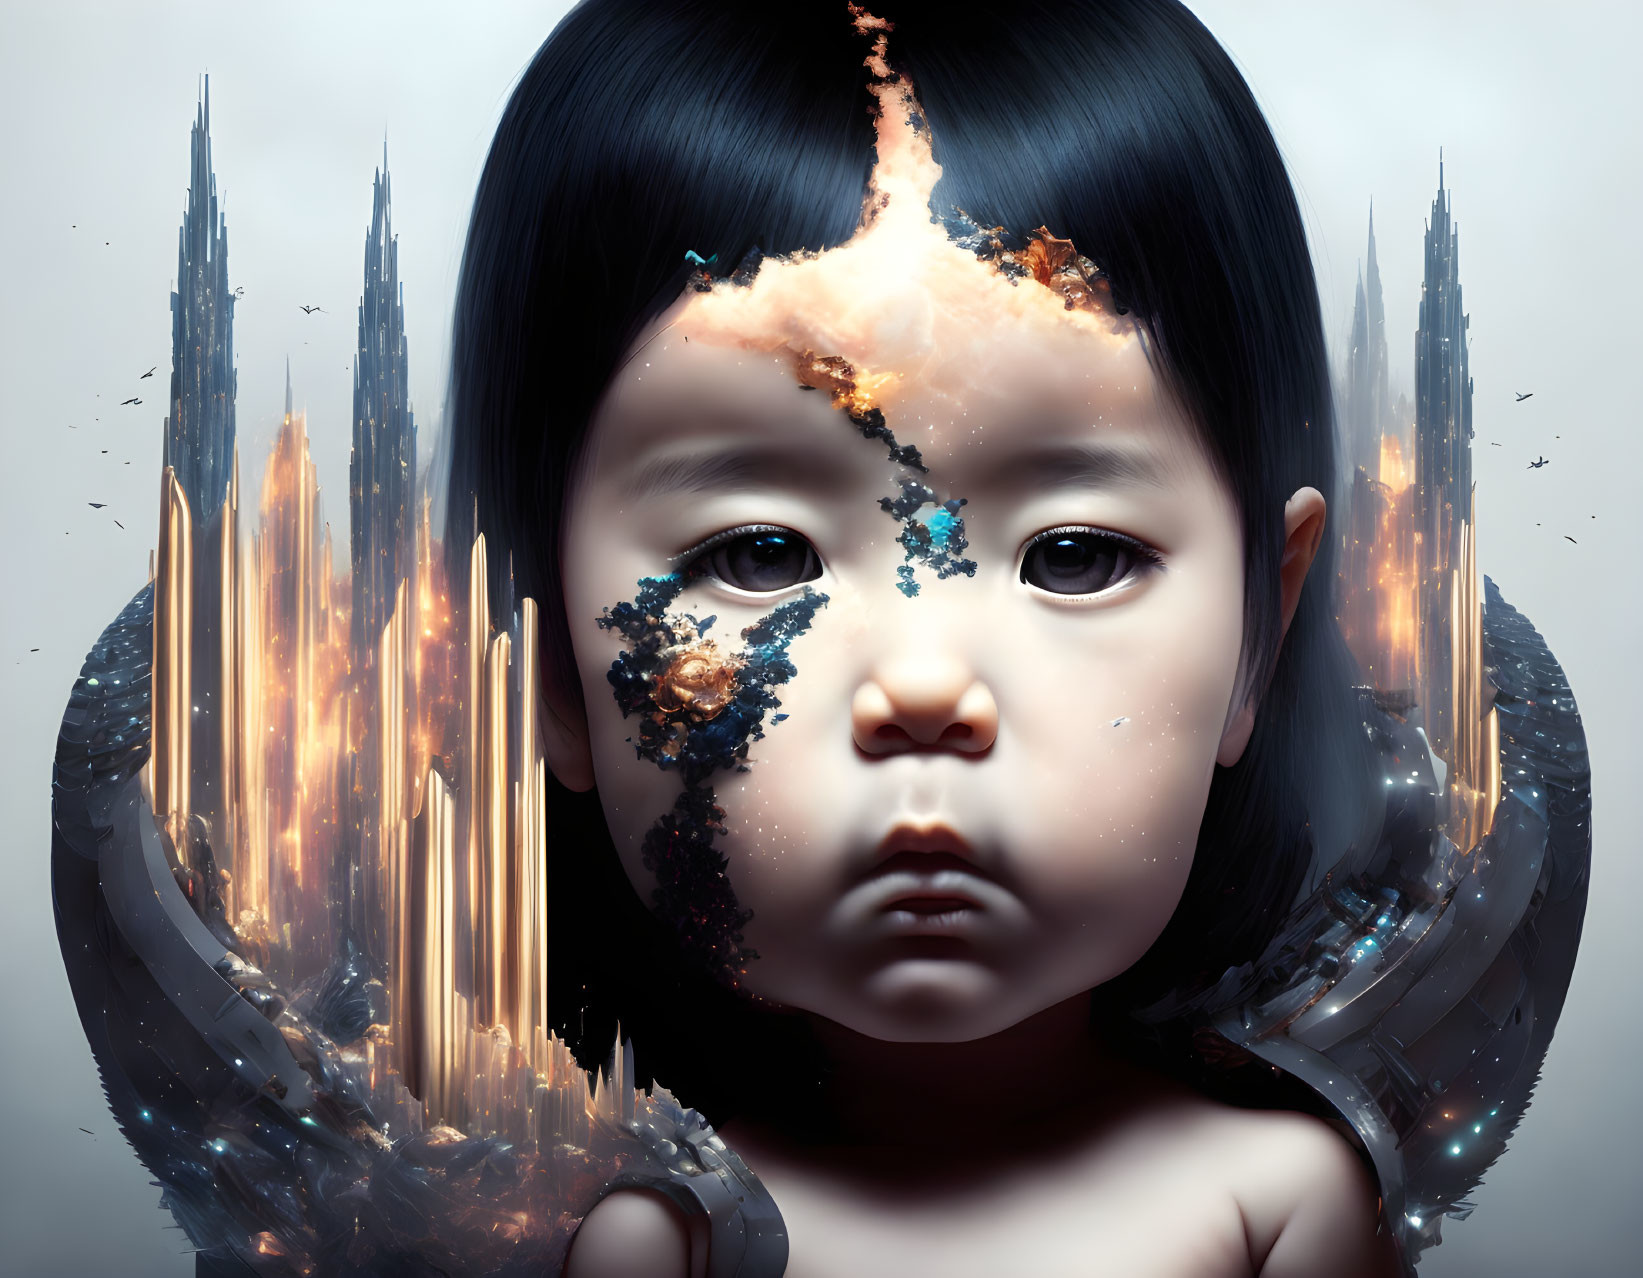 Child with cosmic crack merges cityscape and space in surreal digital artwork